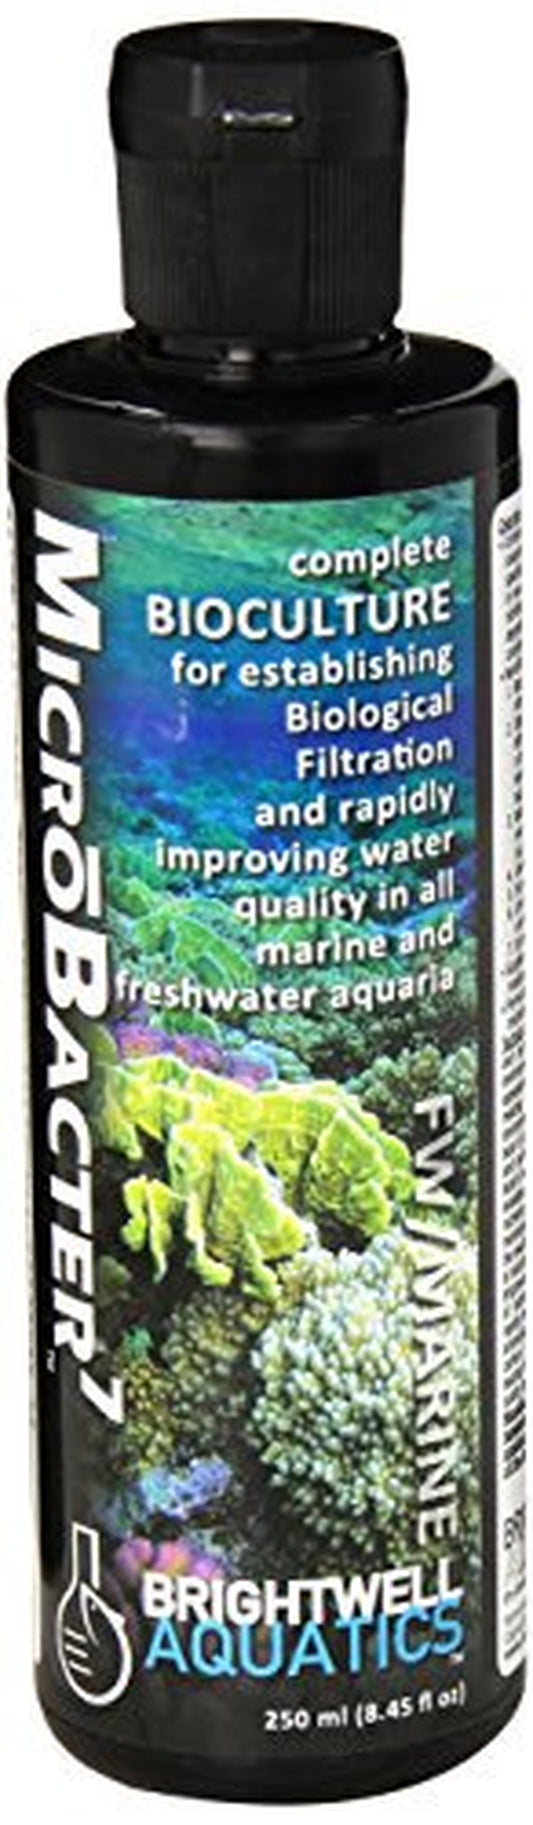 Brightwell Aquatics Microbacter7 - Bacteria & Water Conditioner for Fish Tank or Aquarium, Populates Biological Filter Media for Saltwater and Freshwater Fish Animals & Pet Supplies > Pet Supplies > Fish Supplies > Aquarium Filters Brightwell Aquatics   